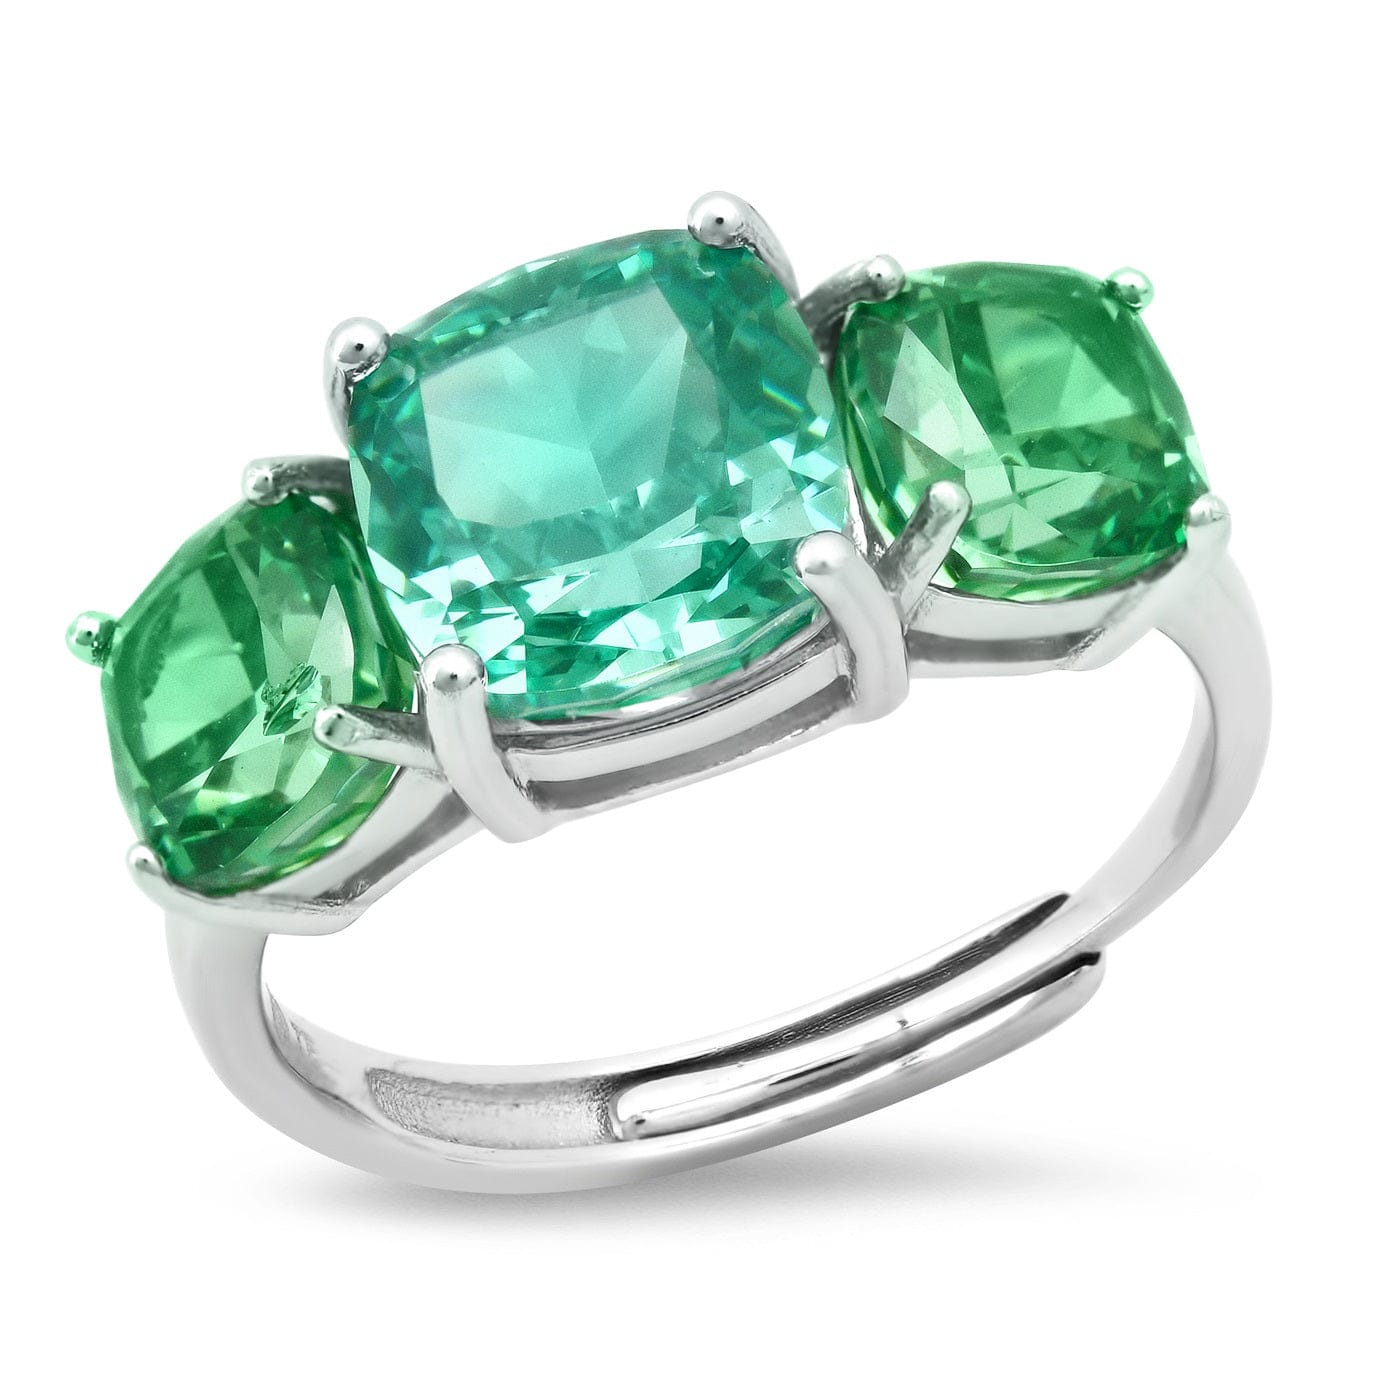 TAI JEWELRY Rings Sterling silver/Green Round Three Stone Ring